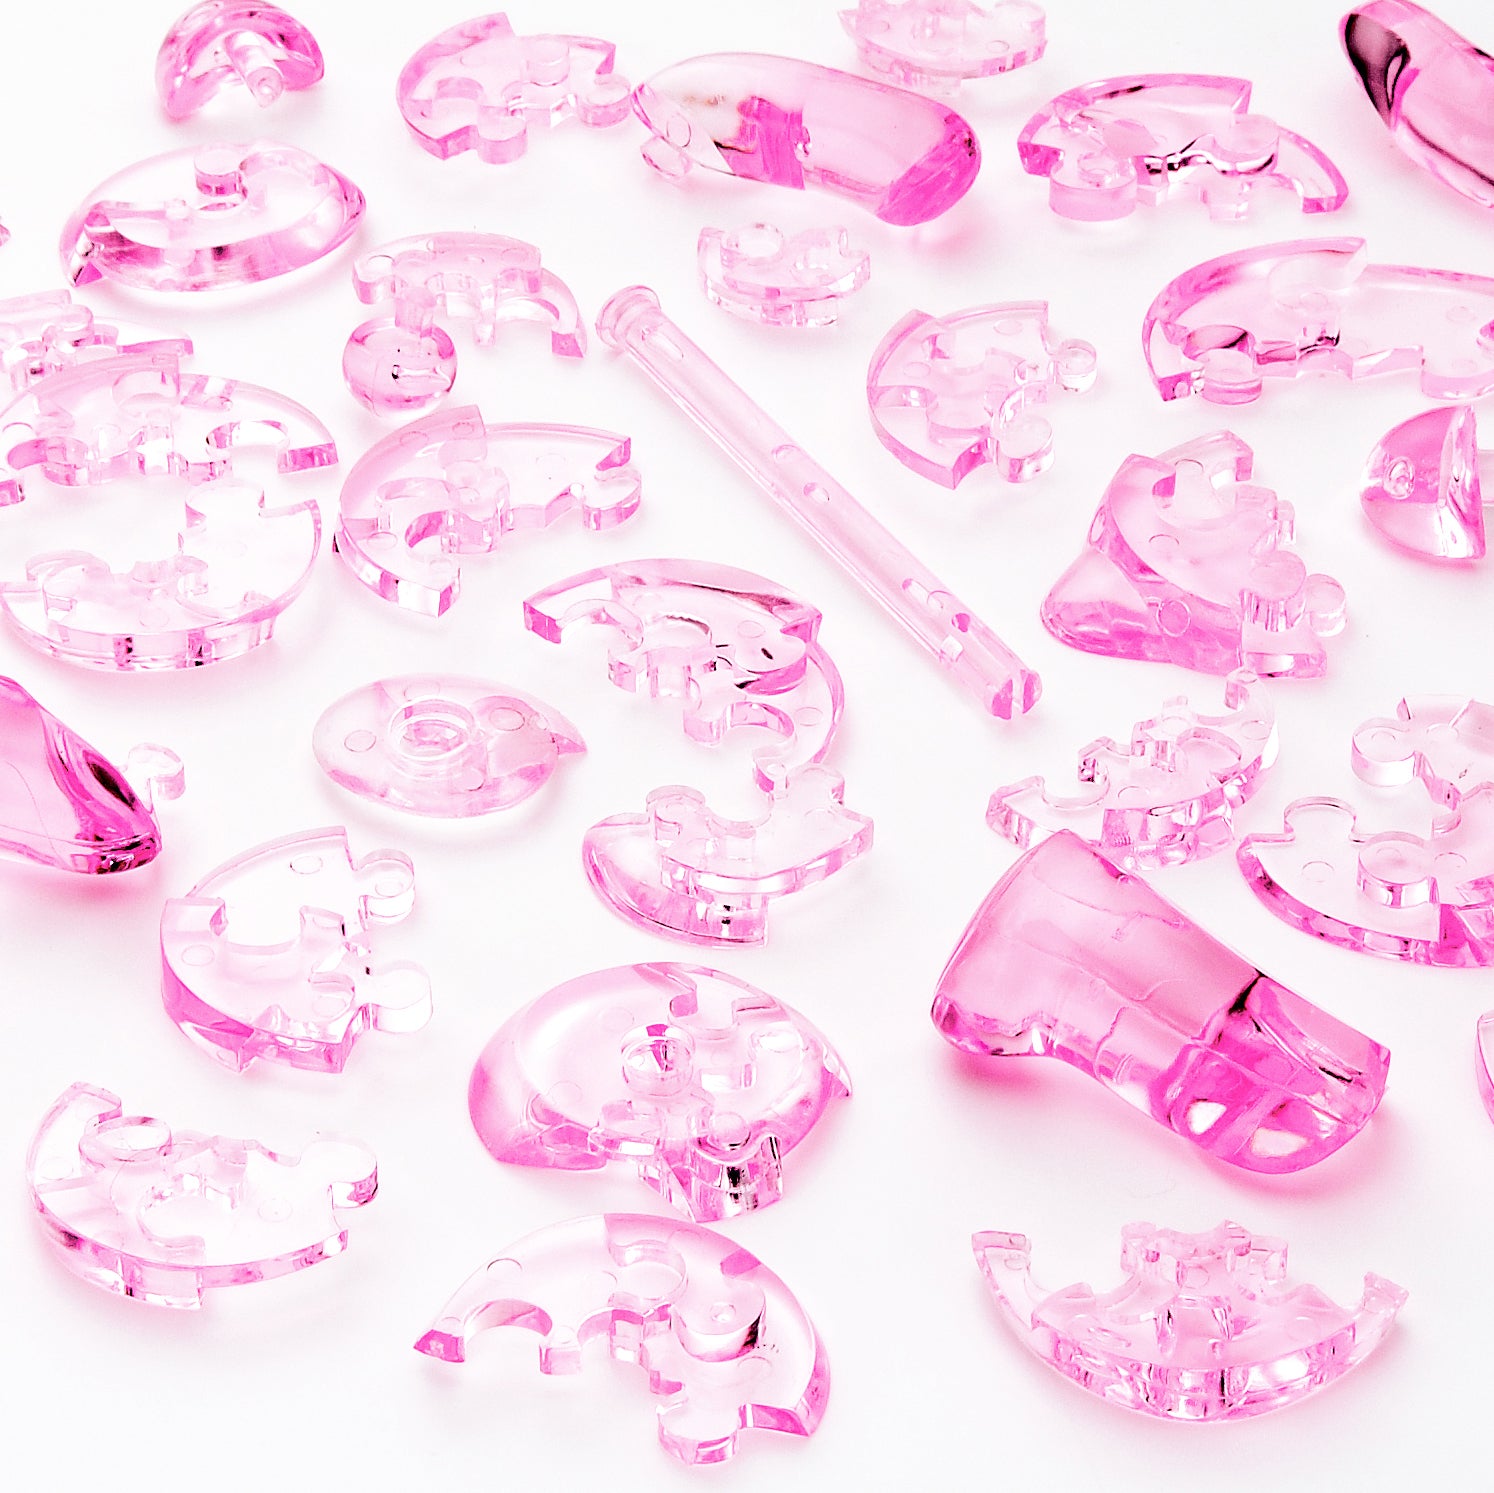 Pink pieces of 3D Crystal Puzzle bear scattered on a white background.